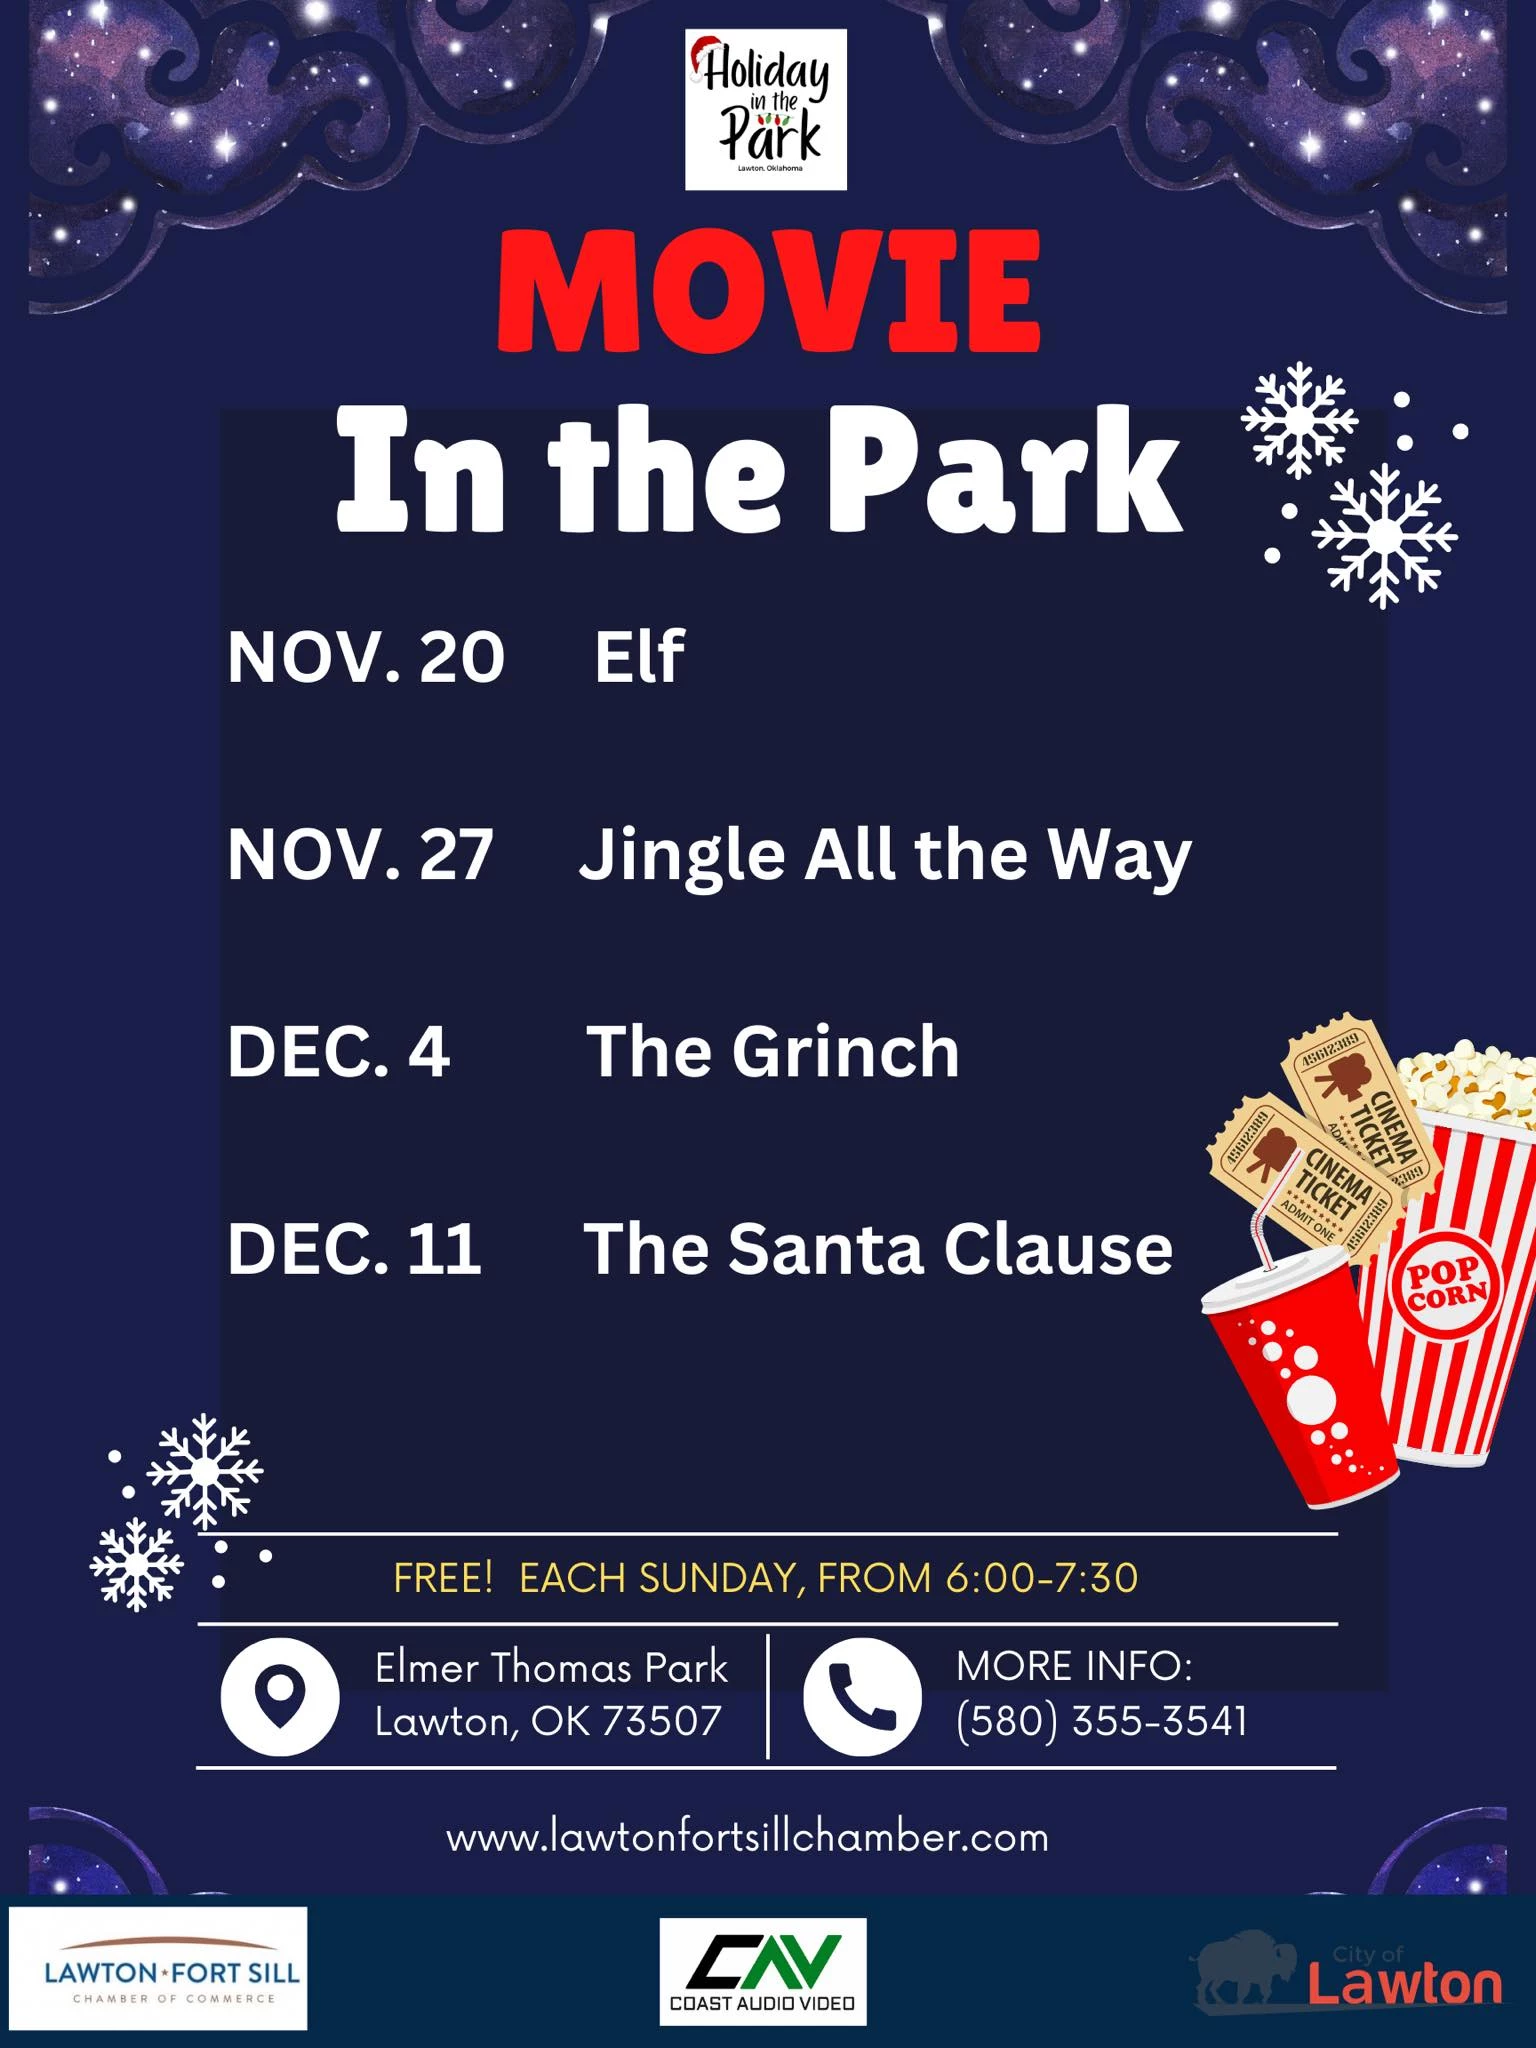 Movie Nights Return to Holiday in the Park in Lawton, OK.